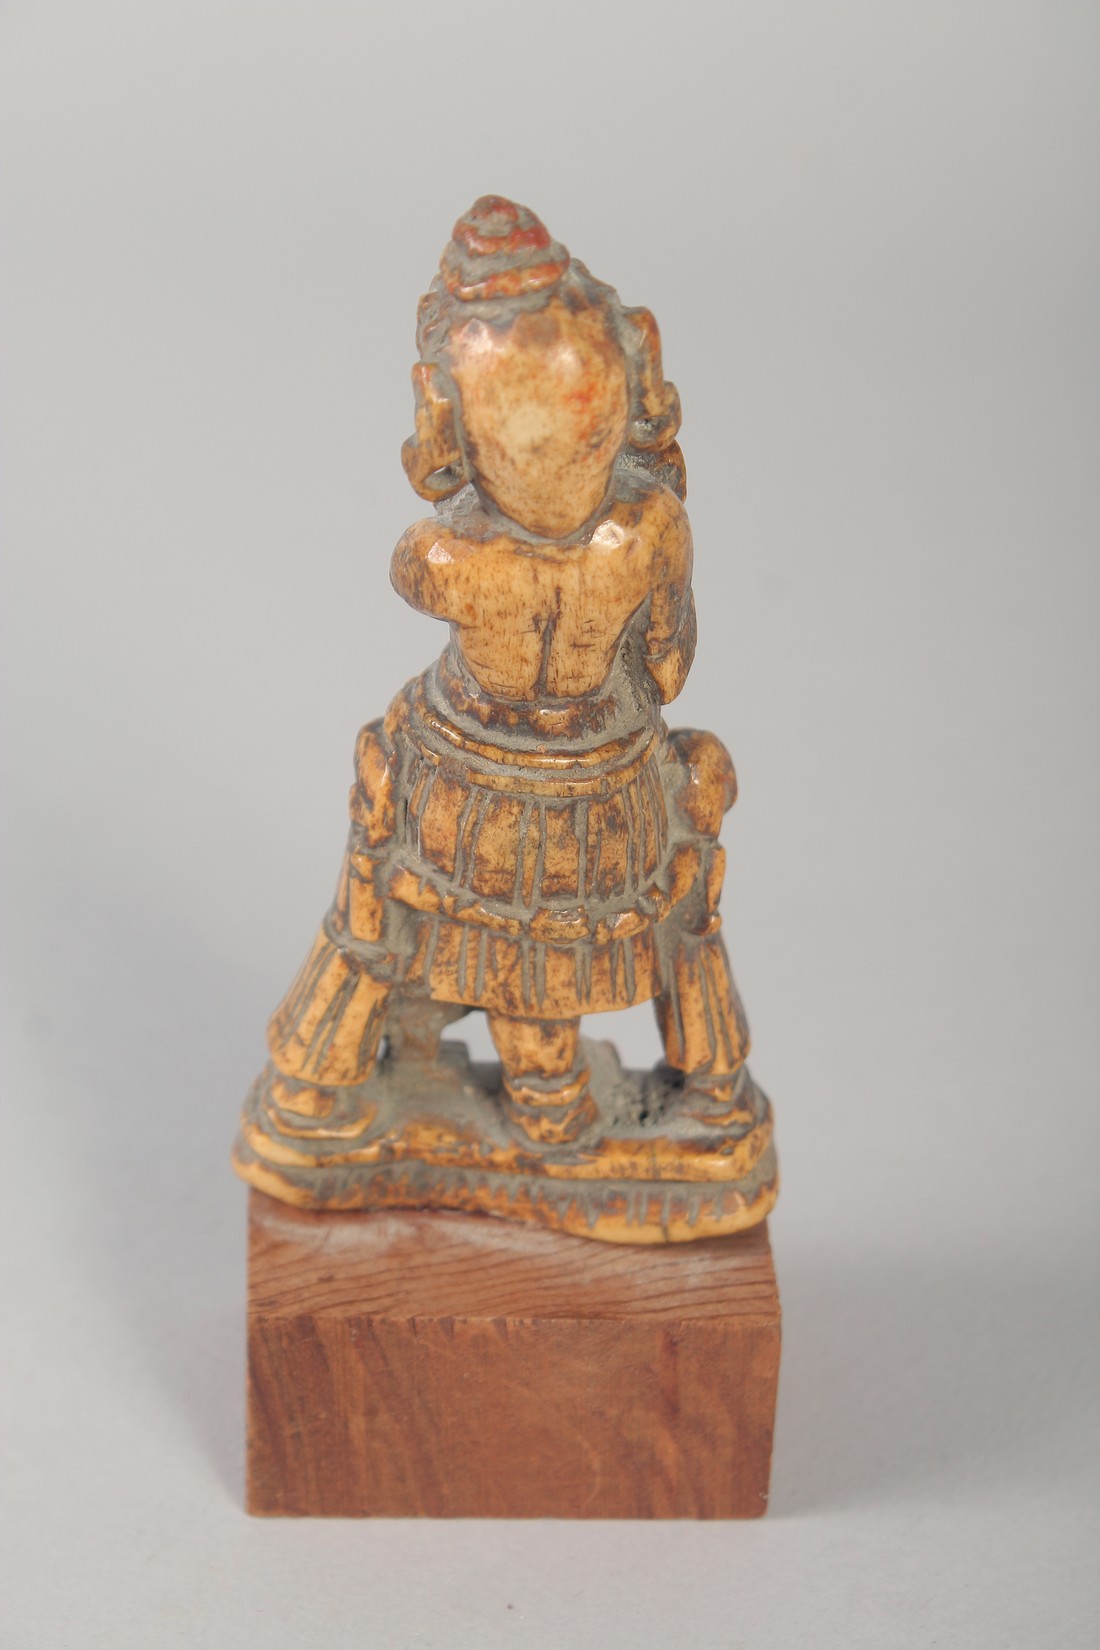 A 17TH CENTURY SOUTH INDIAN CARVED BONE FIGURE of fluting Krishna, mounted to a wooden base, carving - Image 3 of 4